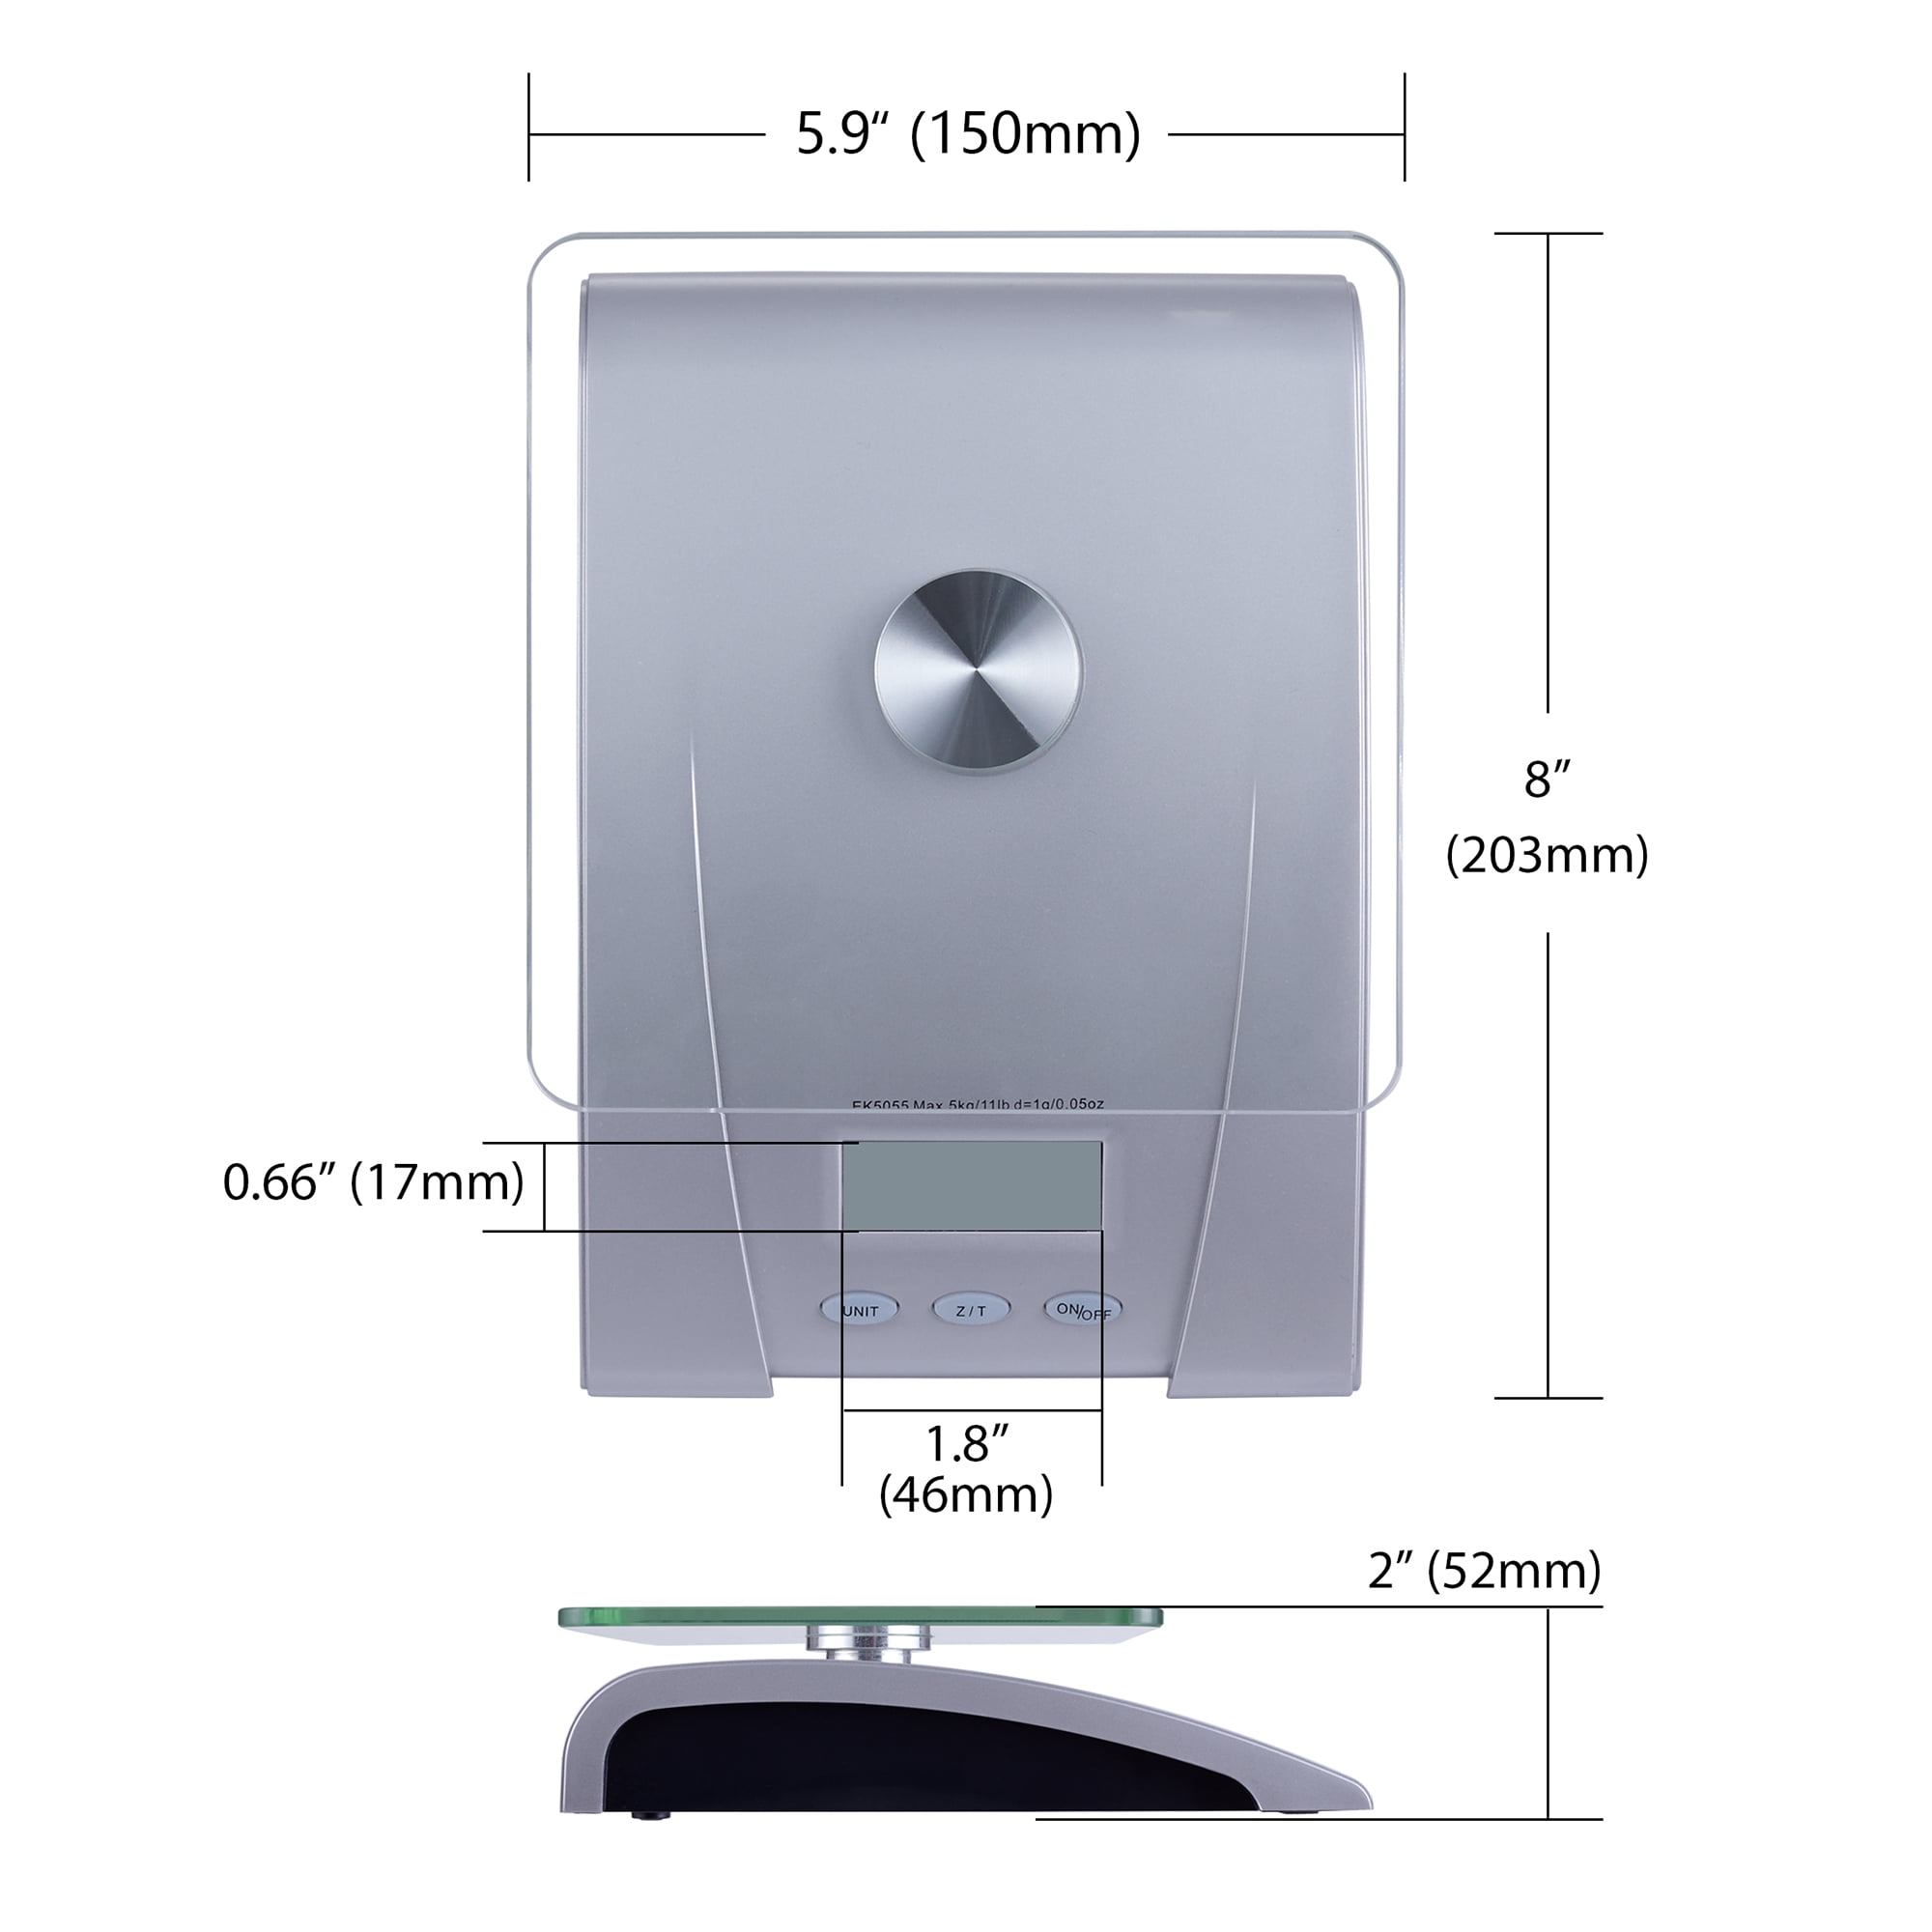 Mainstays Glass Digital Kitchen Scale with transparent glass platform and  silver base. Equipped with high precision loadcell it can measure capacity  maximum to 5000g/11 lb with increment of 0.05oz/1g 